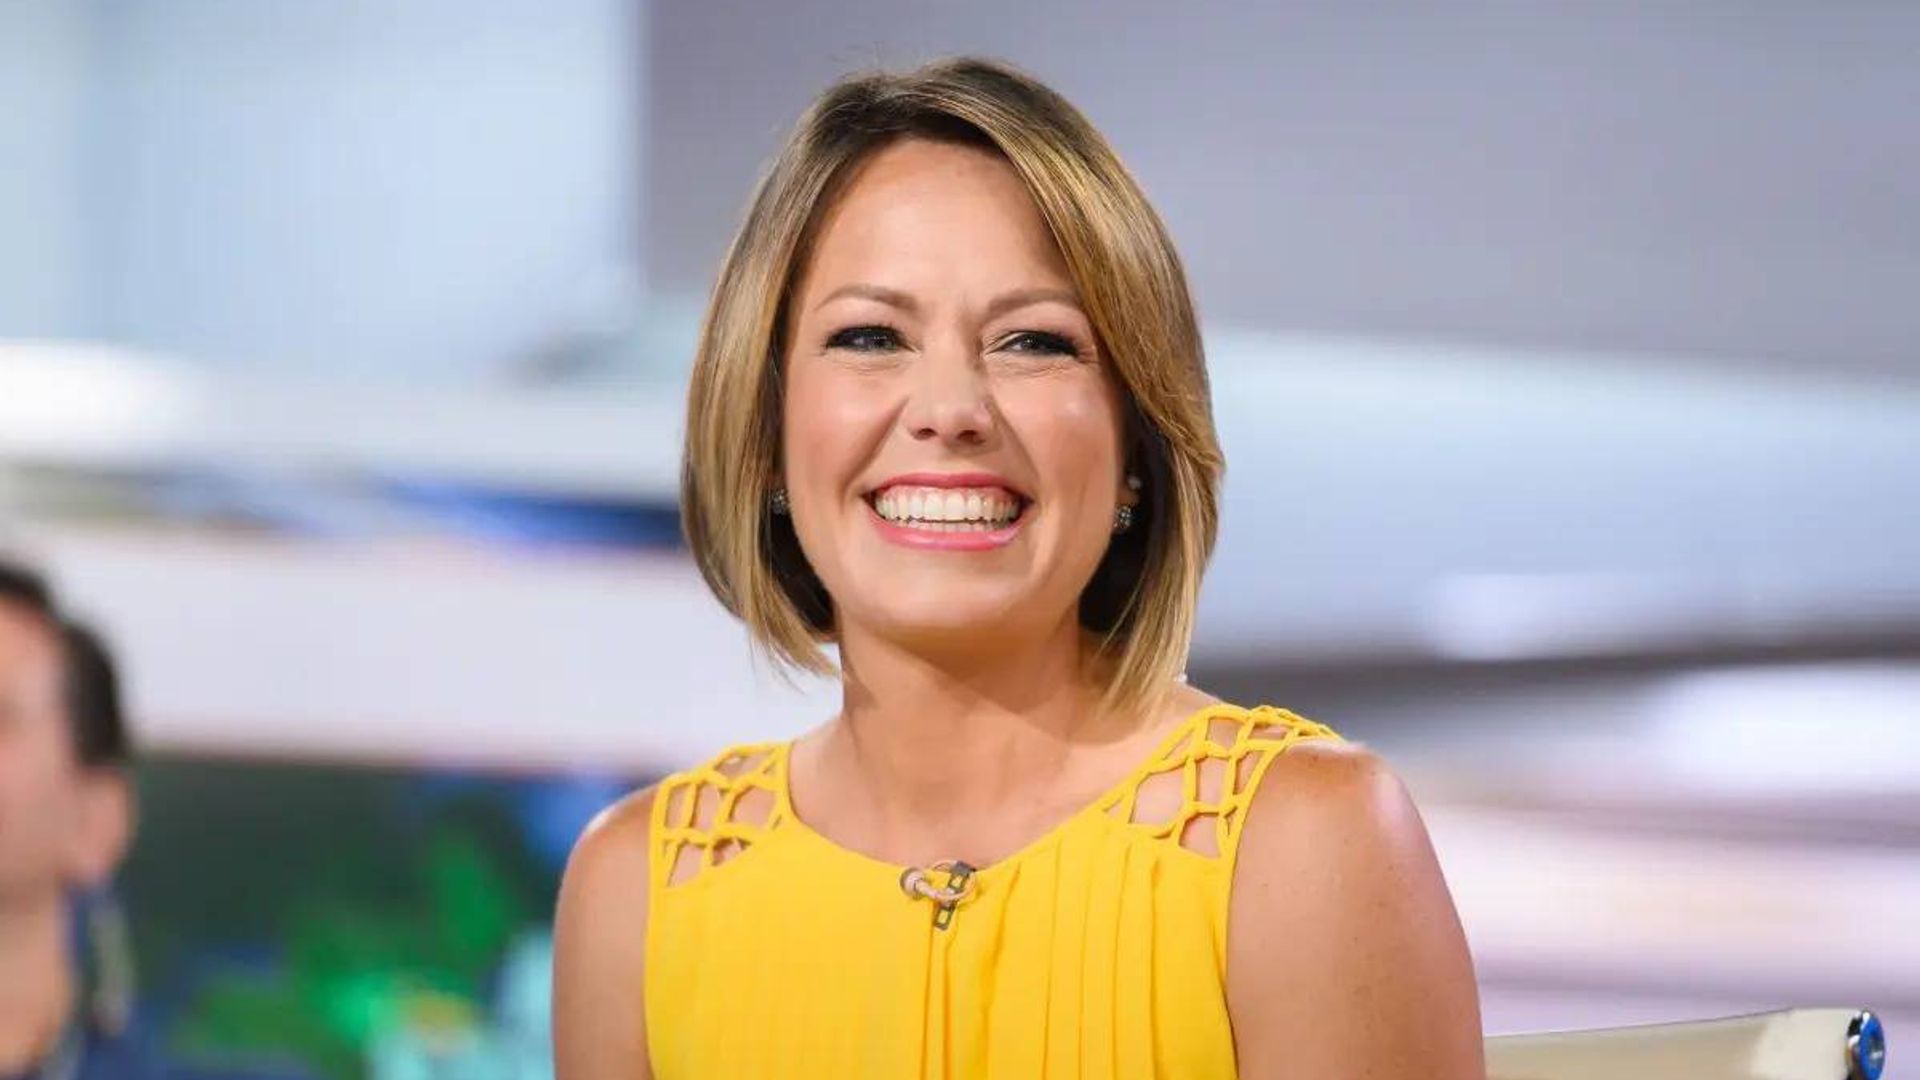 Dylan Dreyer shares 'absolutely incredible' moment she's been waiting two years for